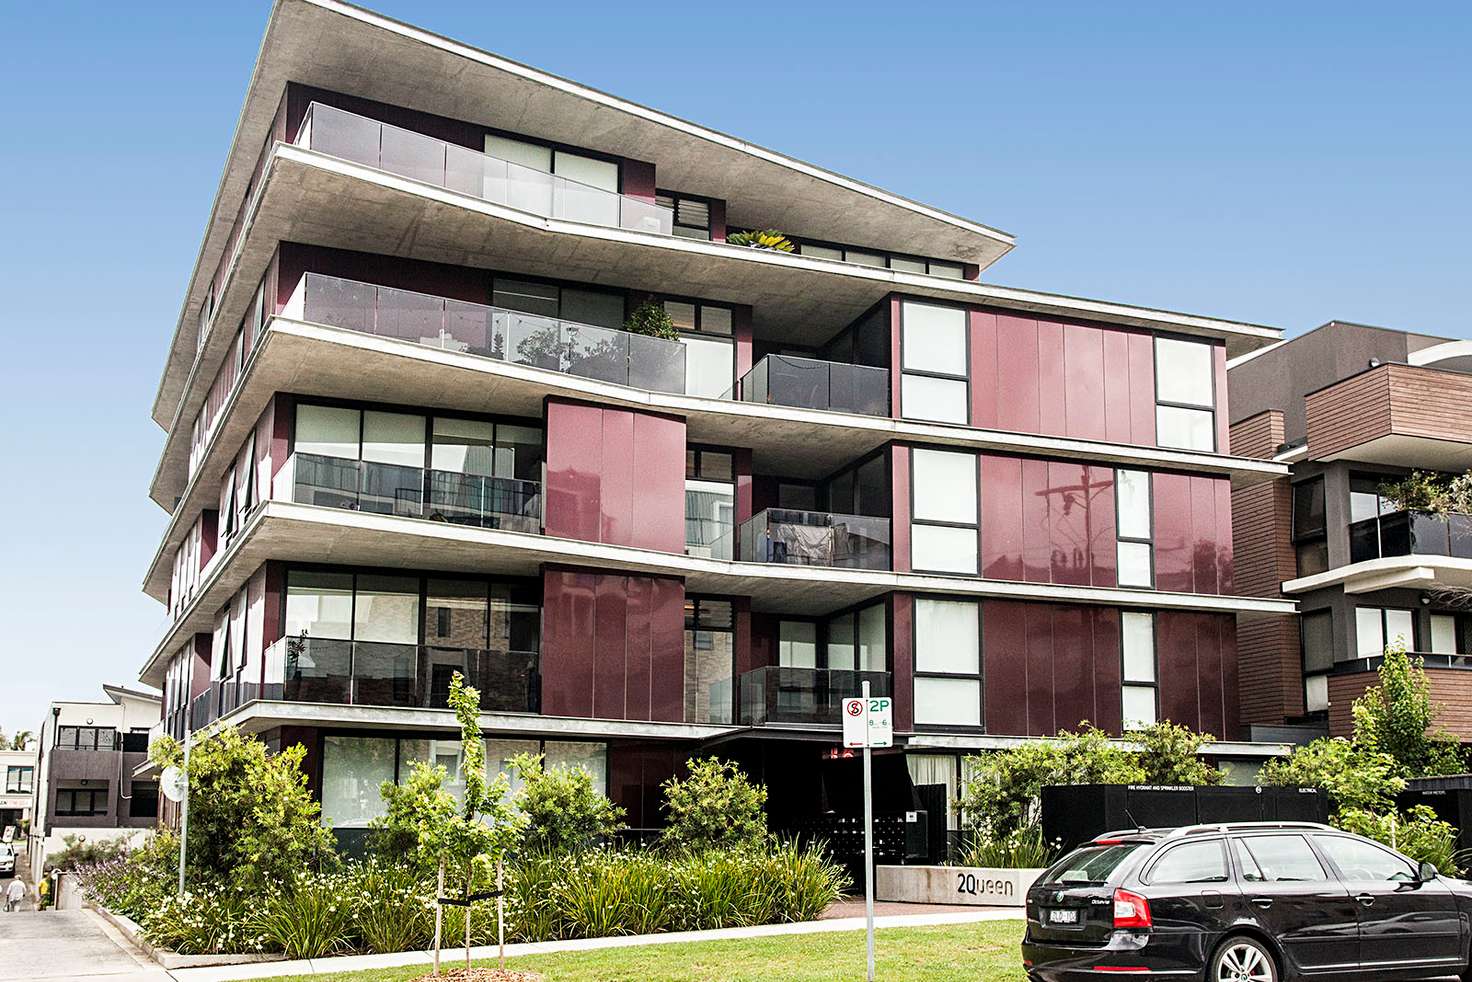 Main view of Homely apartment listing, 506/20 Queen Street, Blackburn VIC 3130